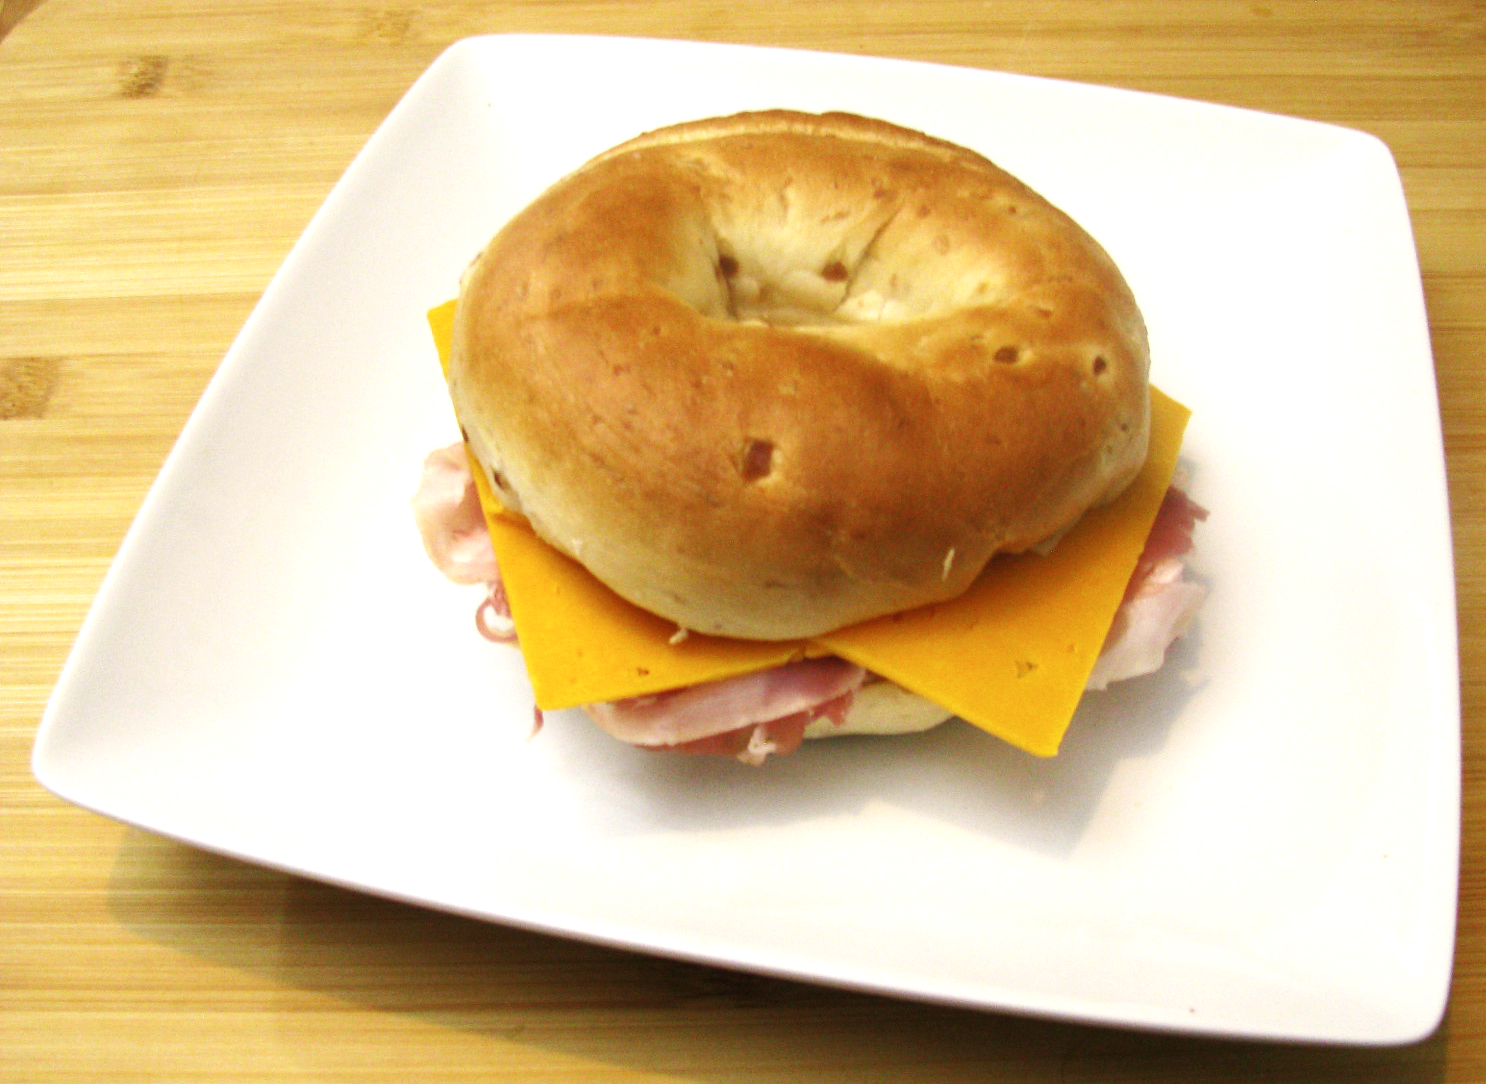 Onion Bagel with Prosciutto and Sliced Cheddar